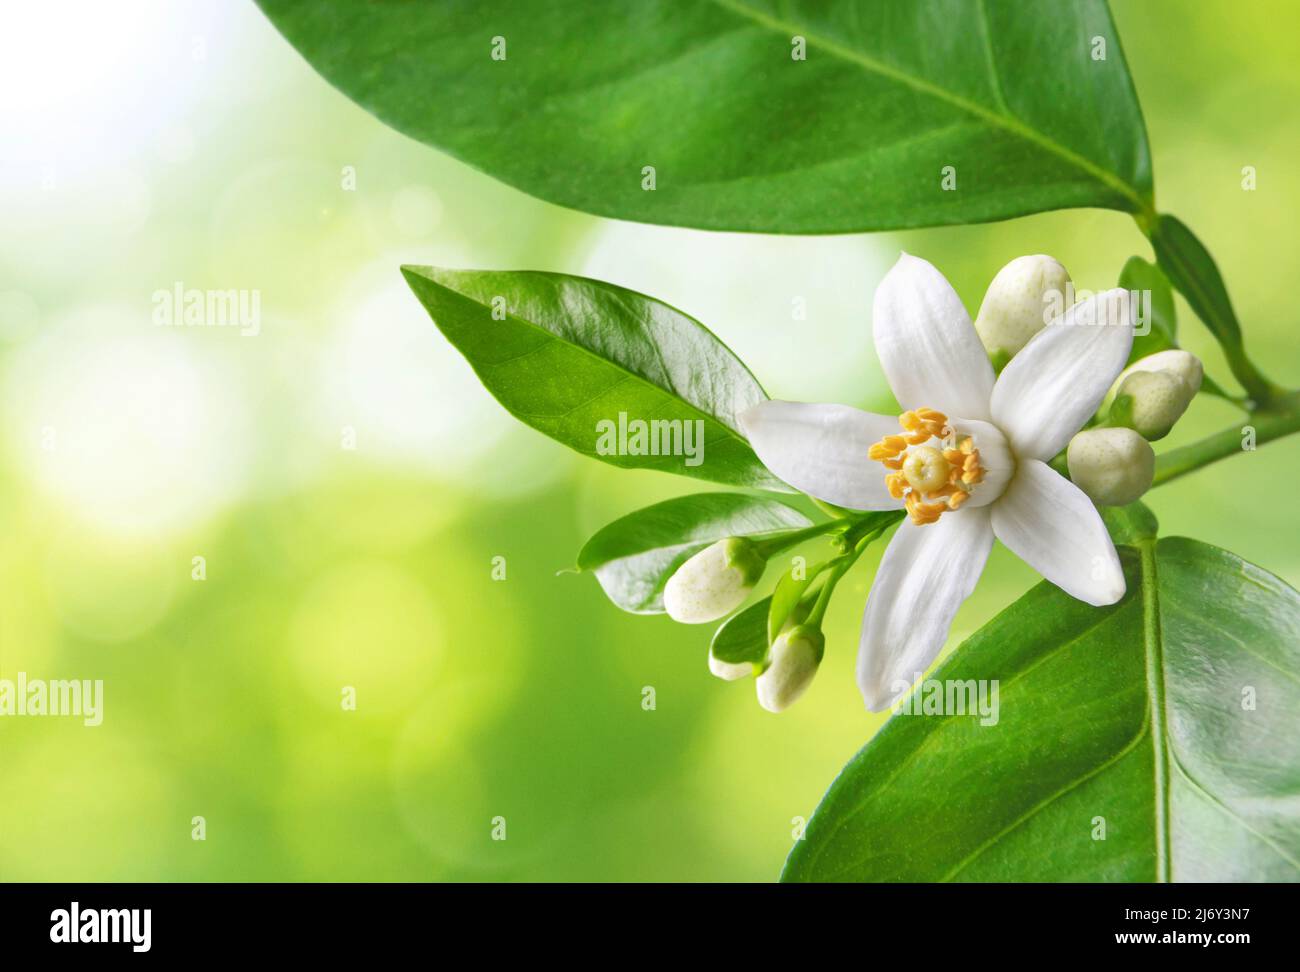 Orange blossom branch with white flowers, buds and leaves on the spring sparkling blurred background. Neroli citrus bloom. Stock Photo